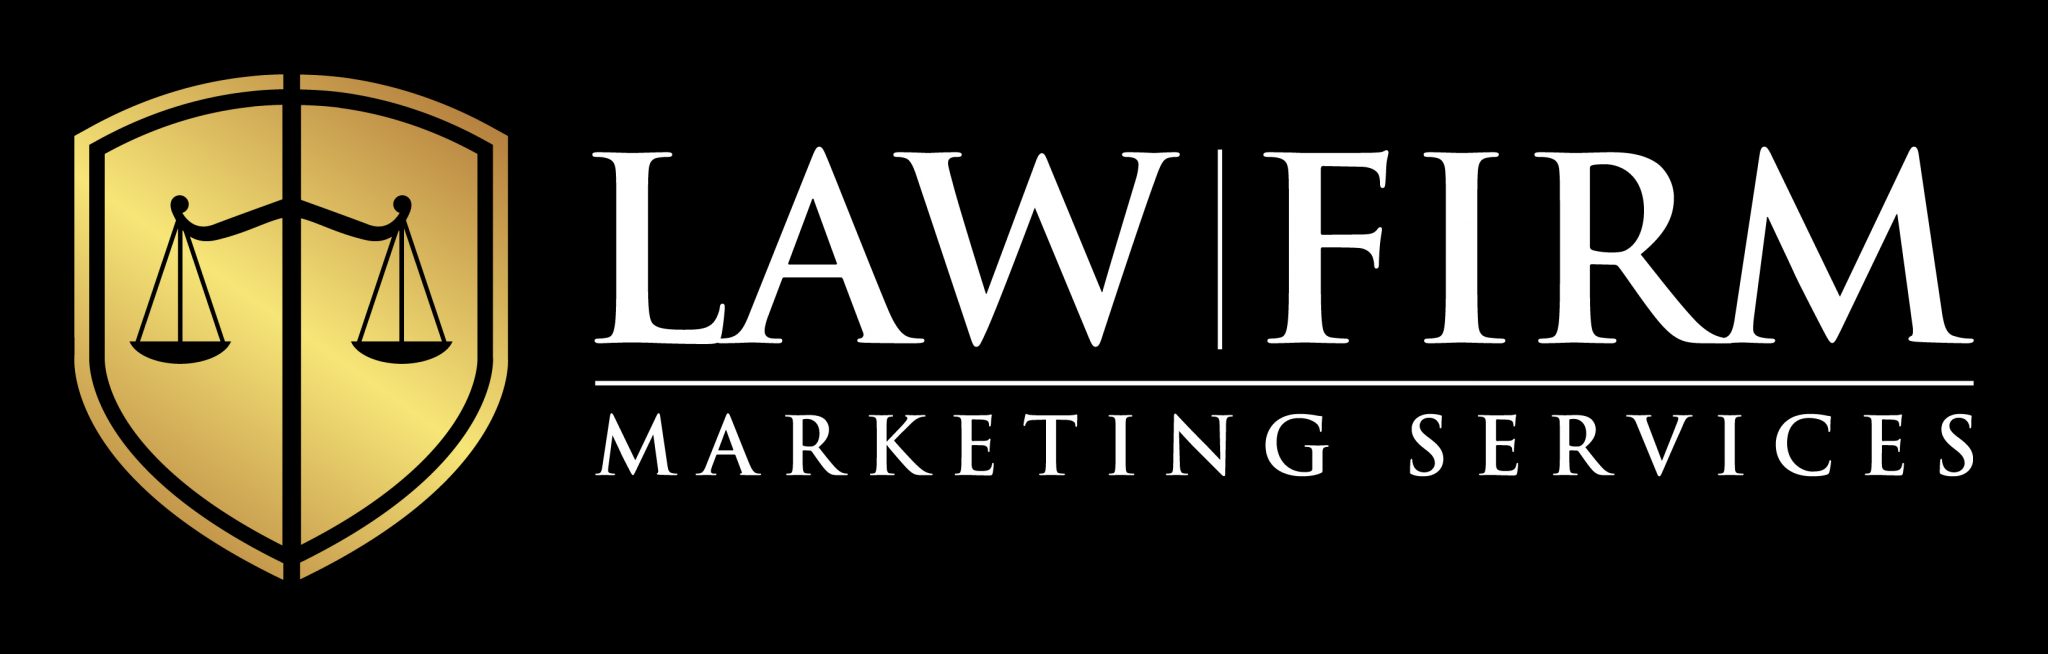 Law Firm Marketing Services